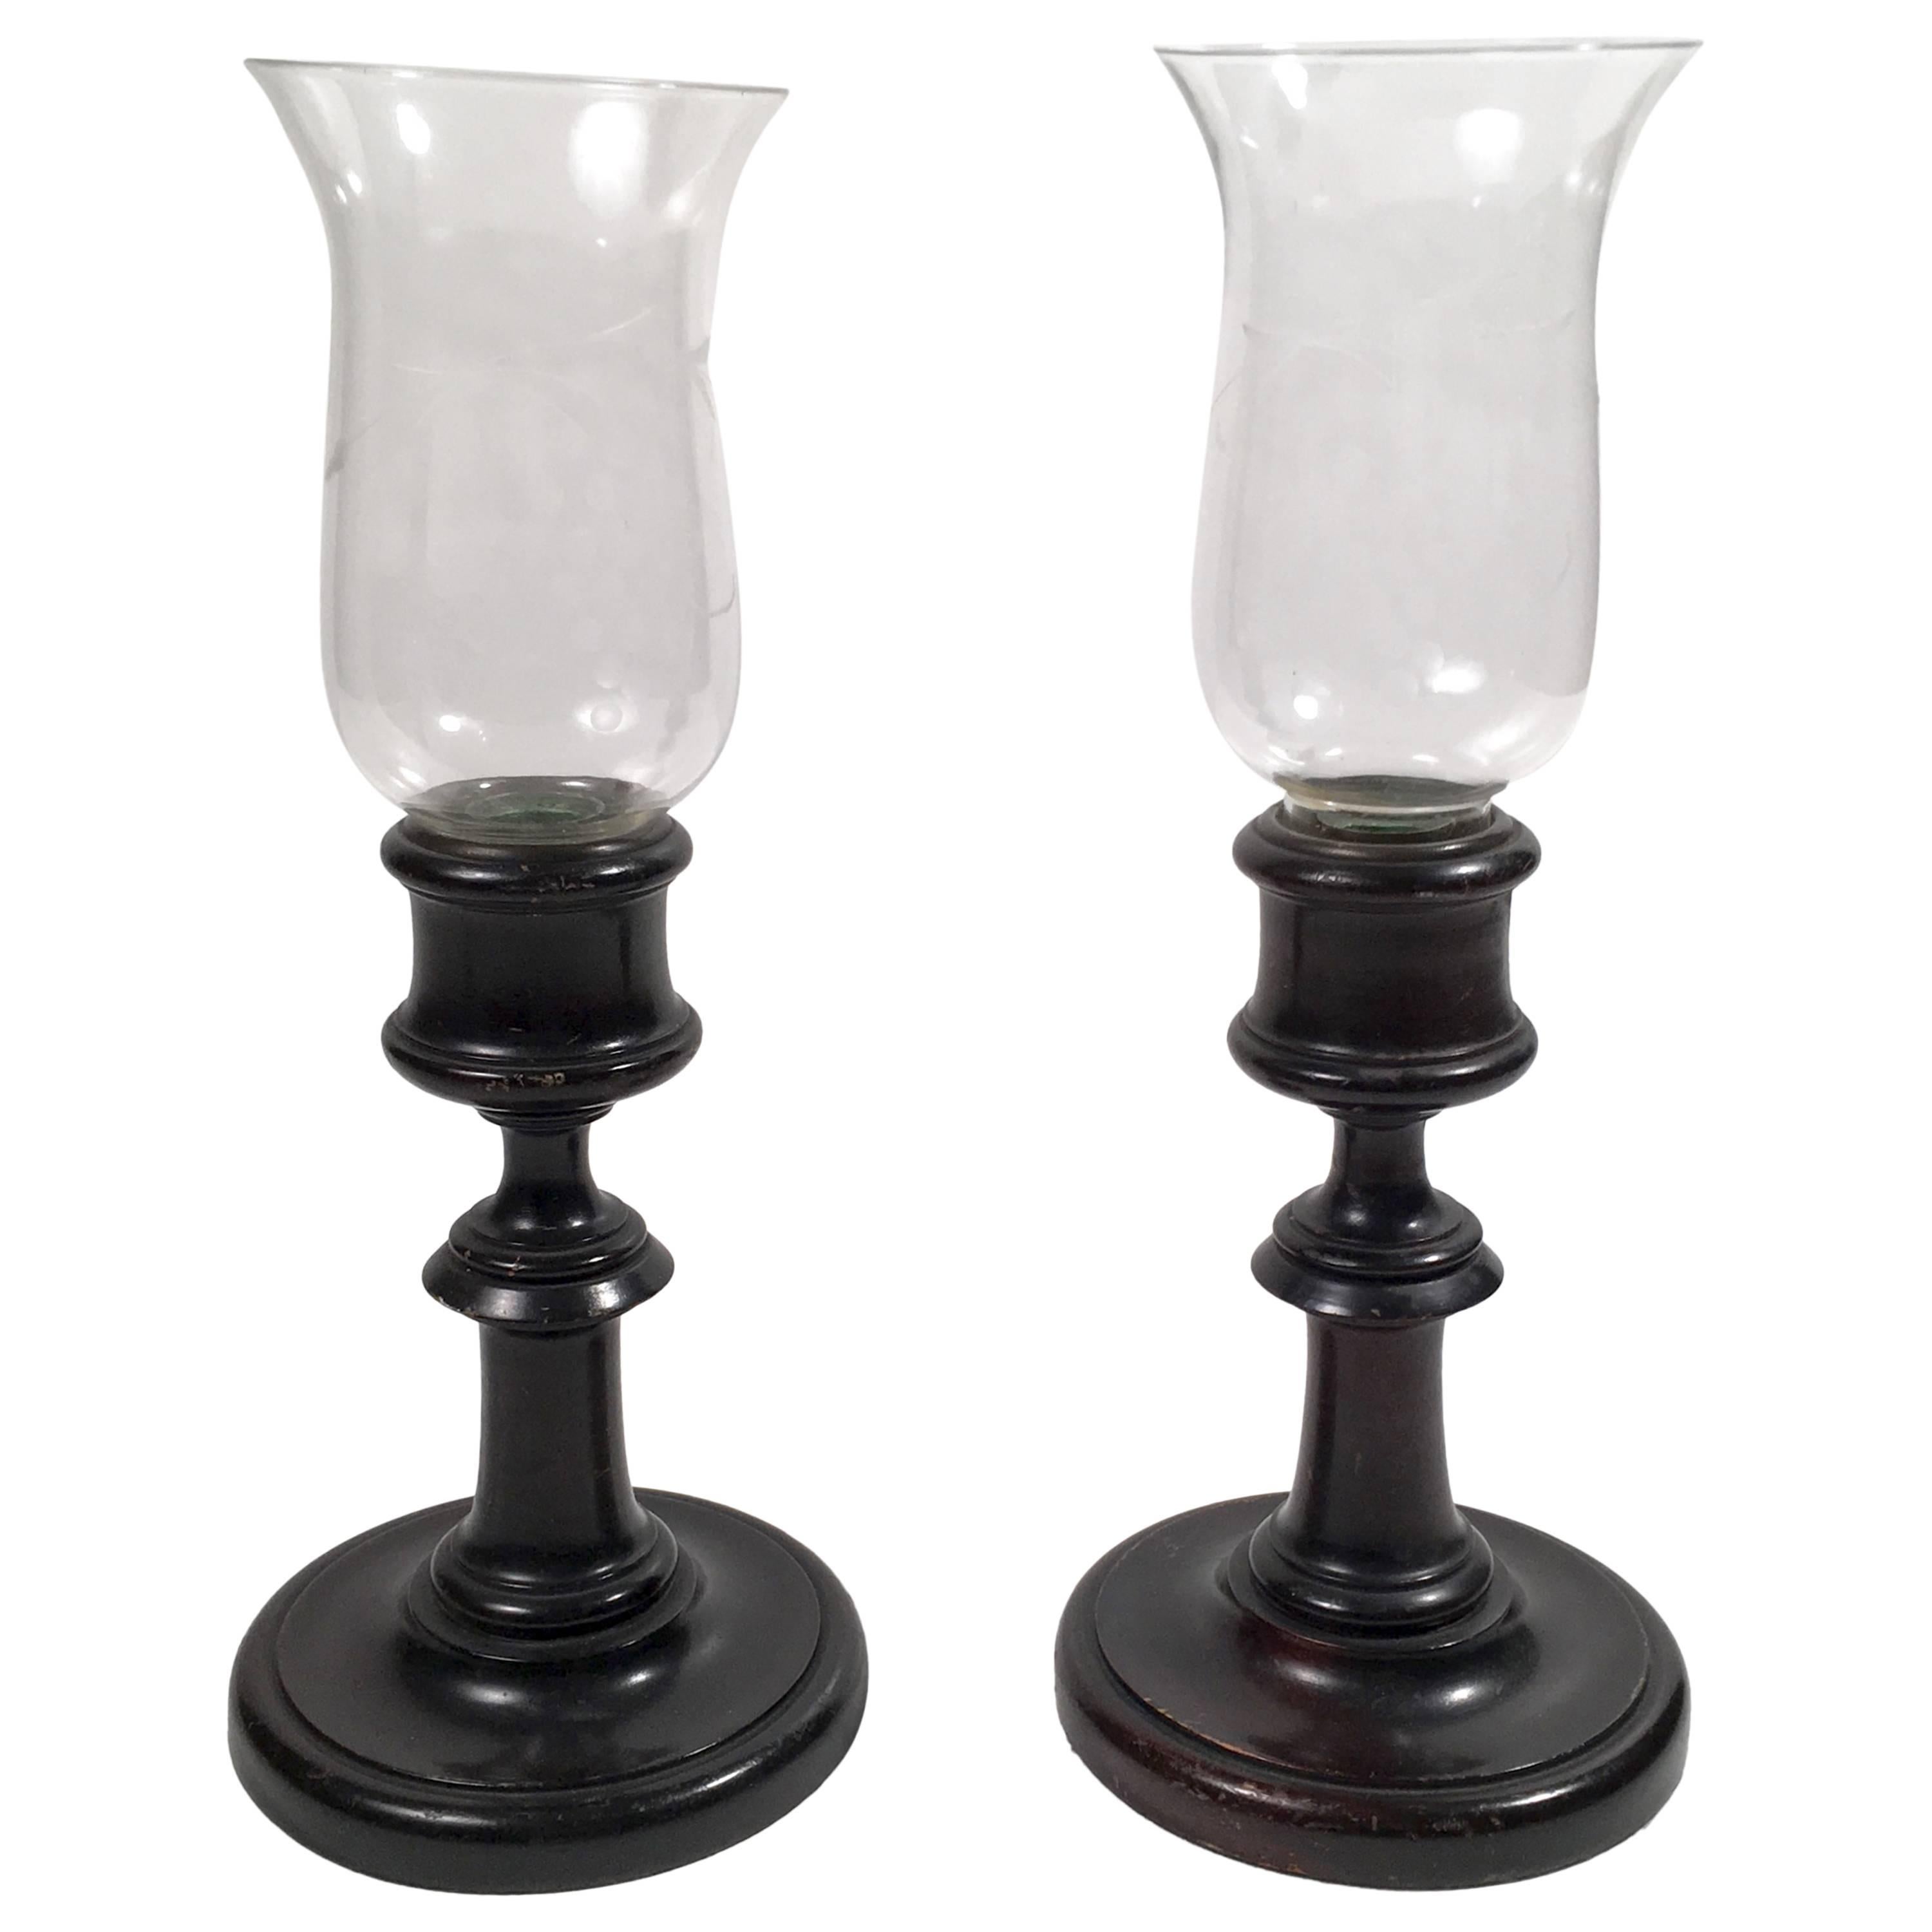 Pair of Candlesticks or Photophores with Glass Hurricane Shades